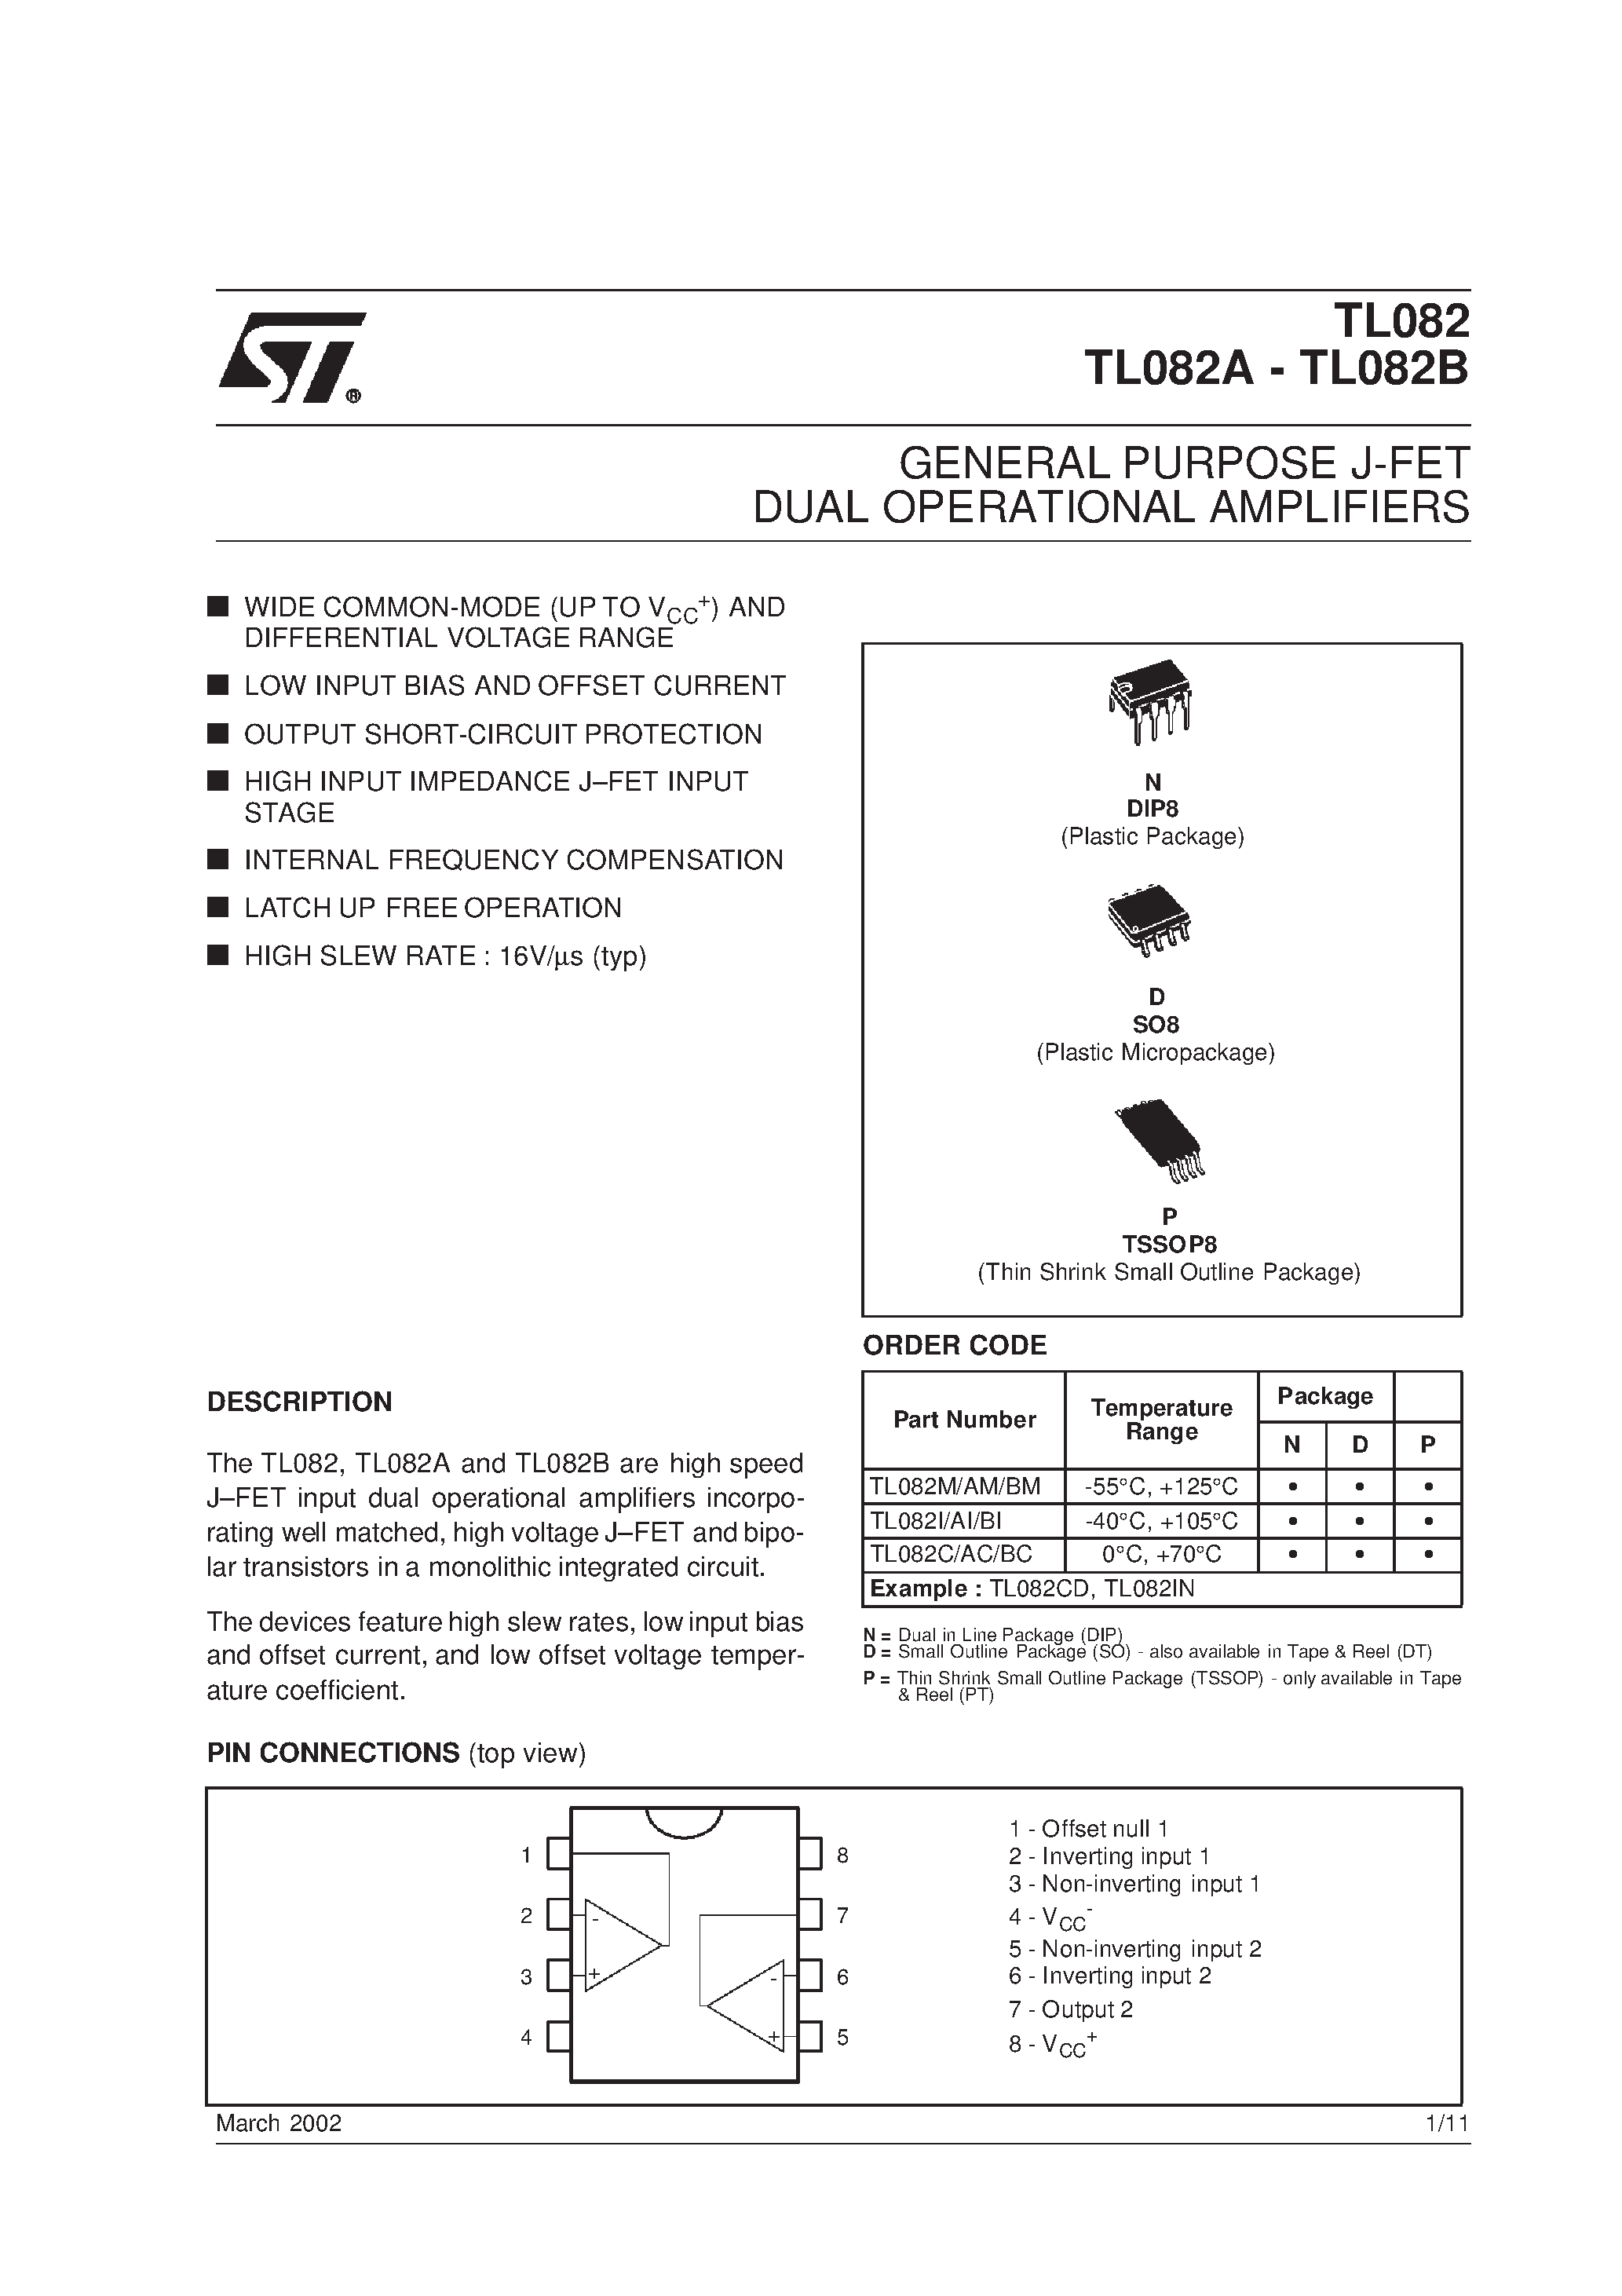 Datasheet TL082A - GENERAL PURPOSE J-FET DUAL OPERATIONAL AMPLIFIERS page 1